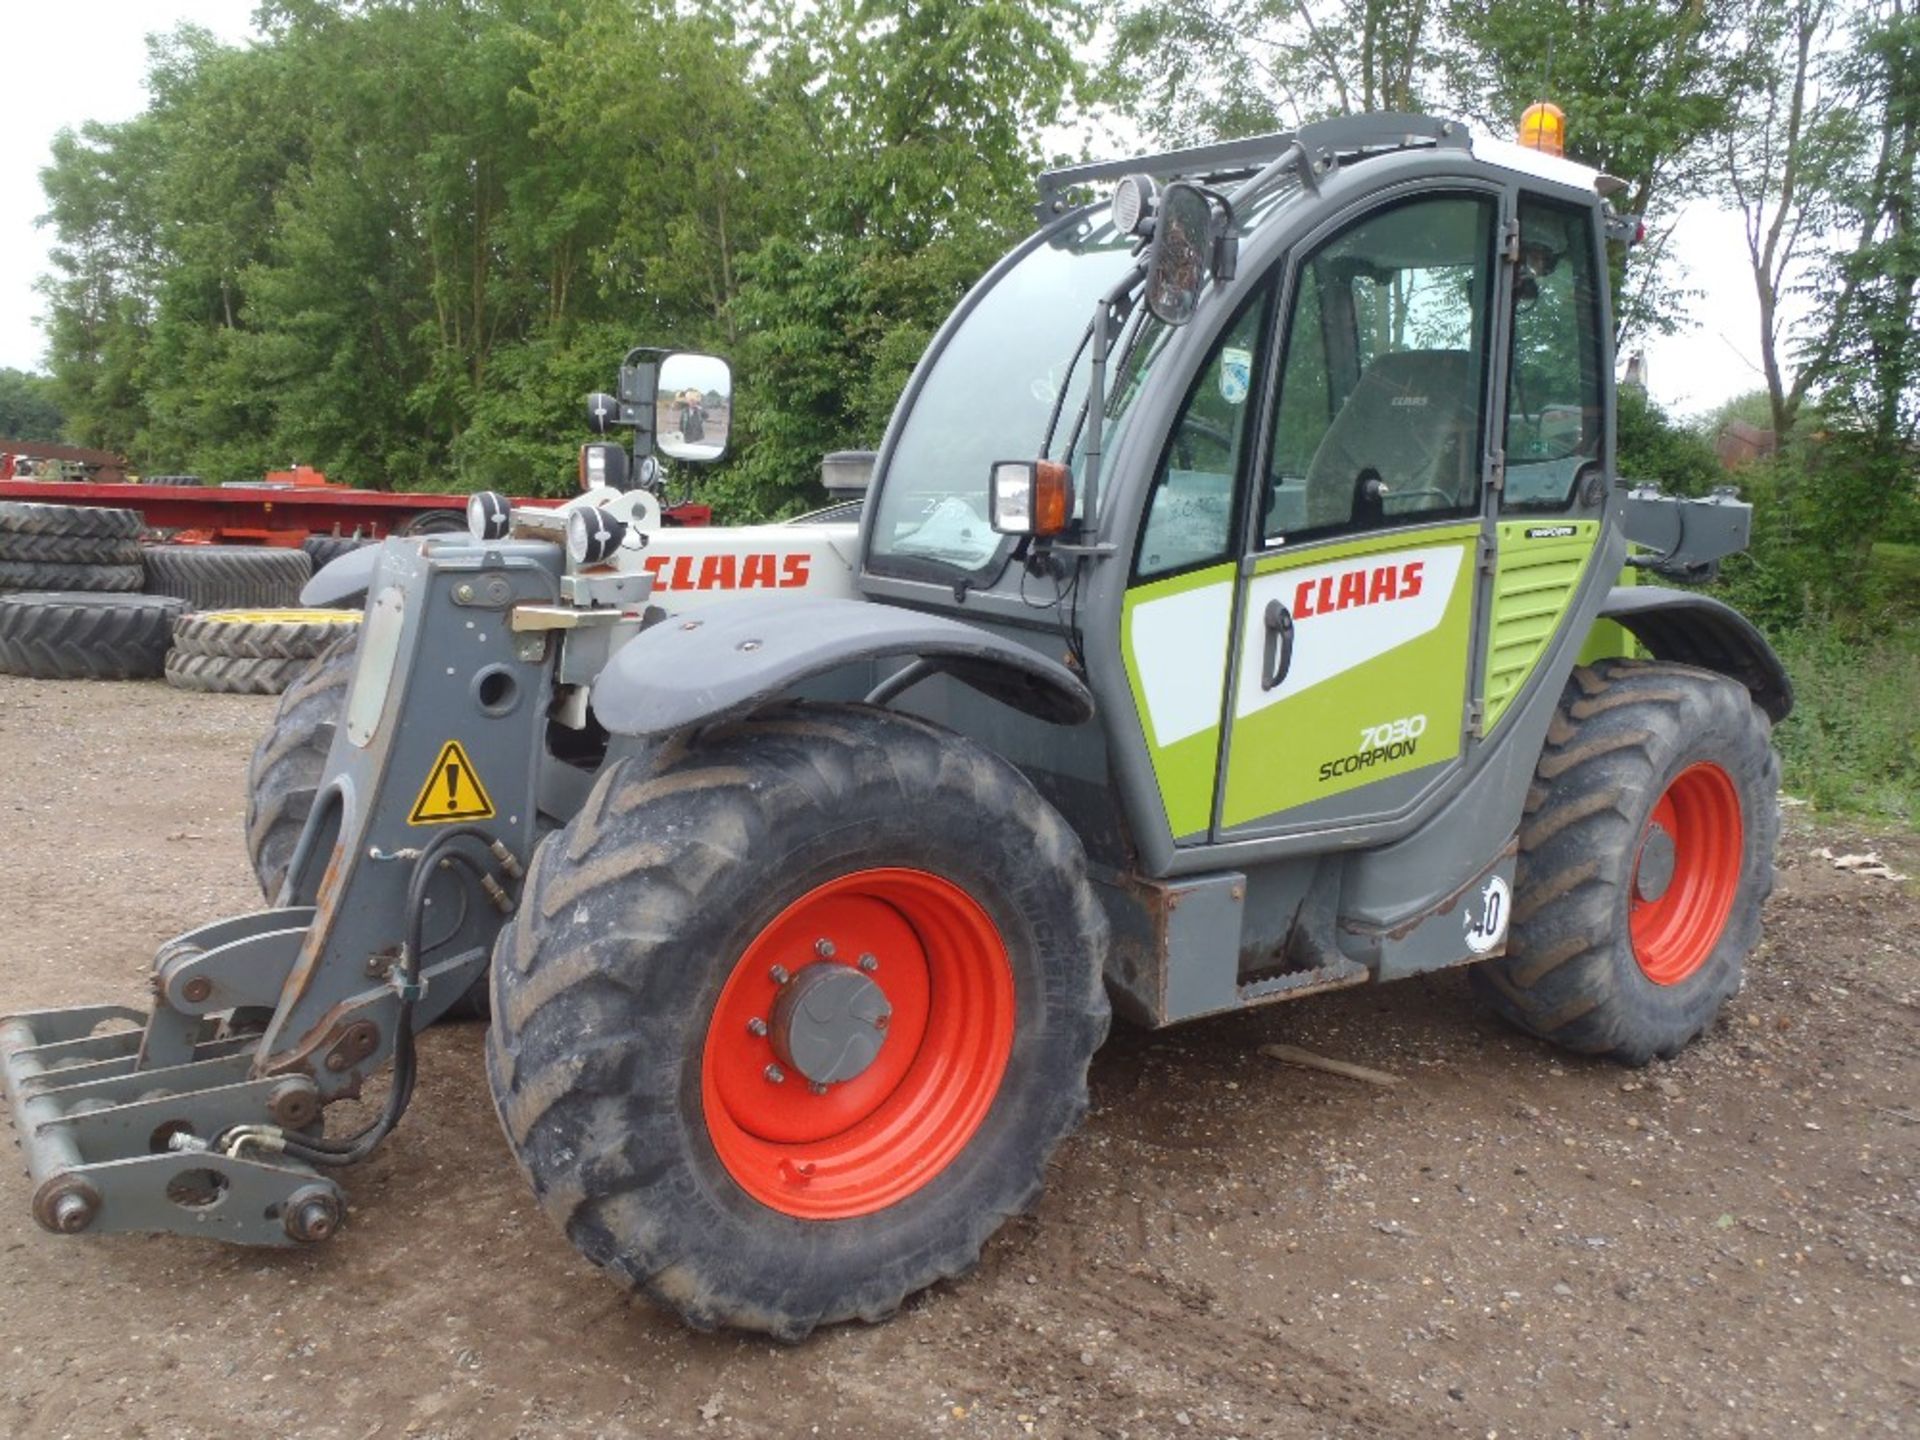 Claas Scorpion 7030. V5 will be supplied Reg. No. OU11 FHW Ser No 401030601